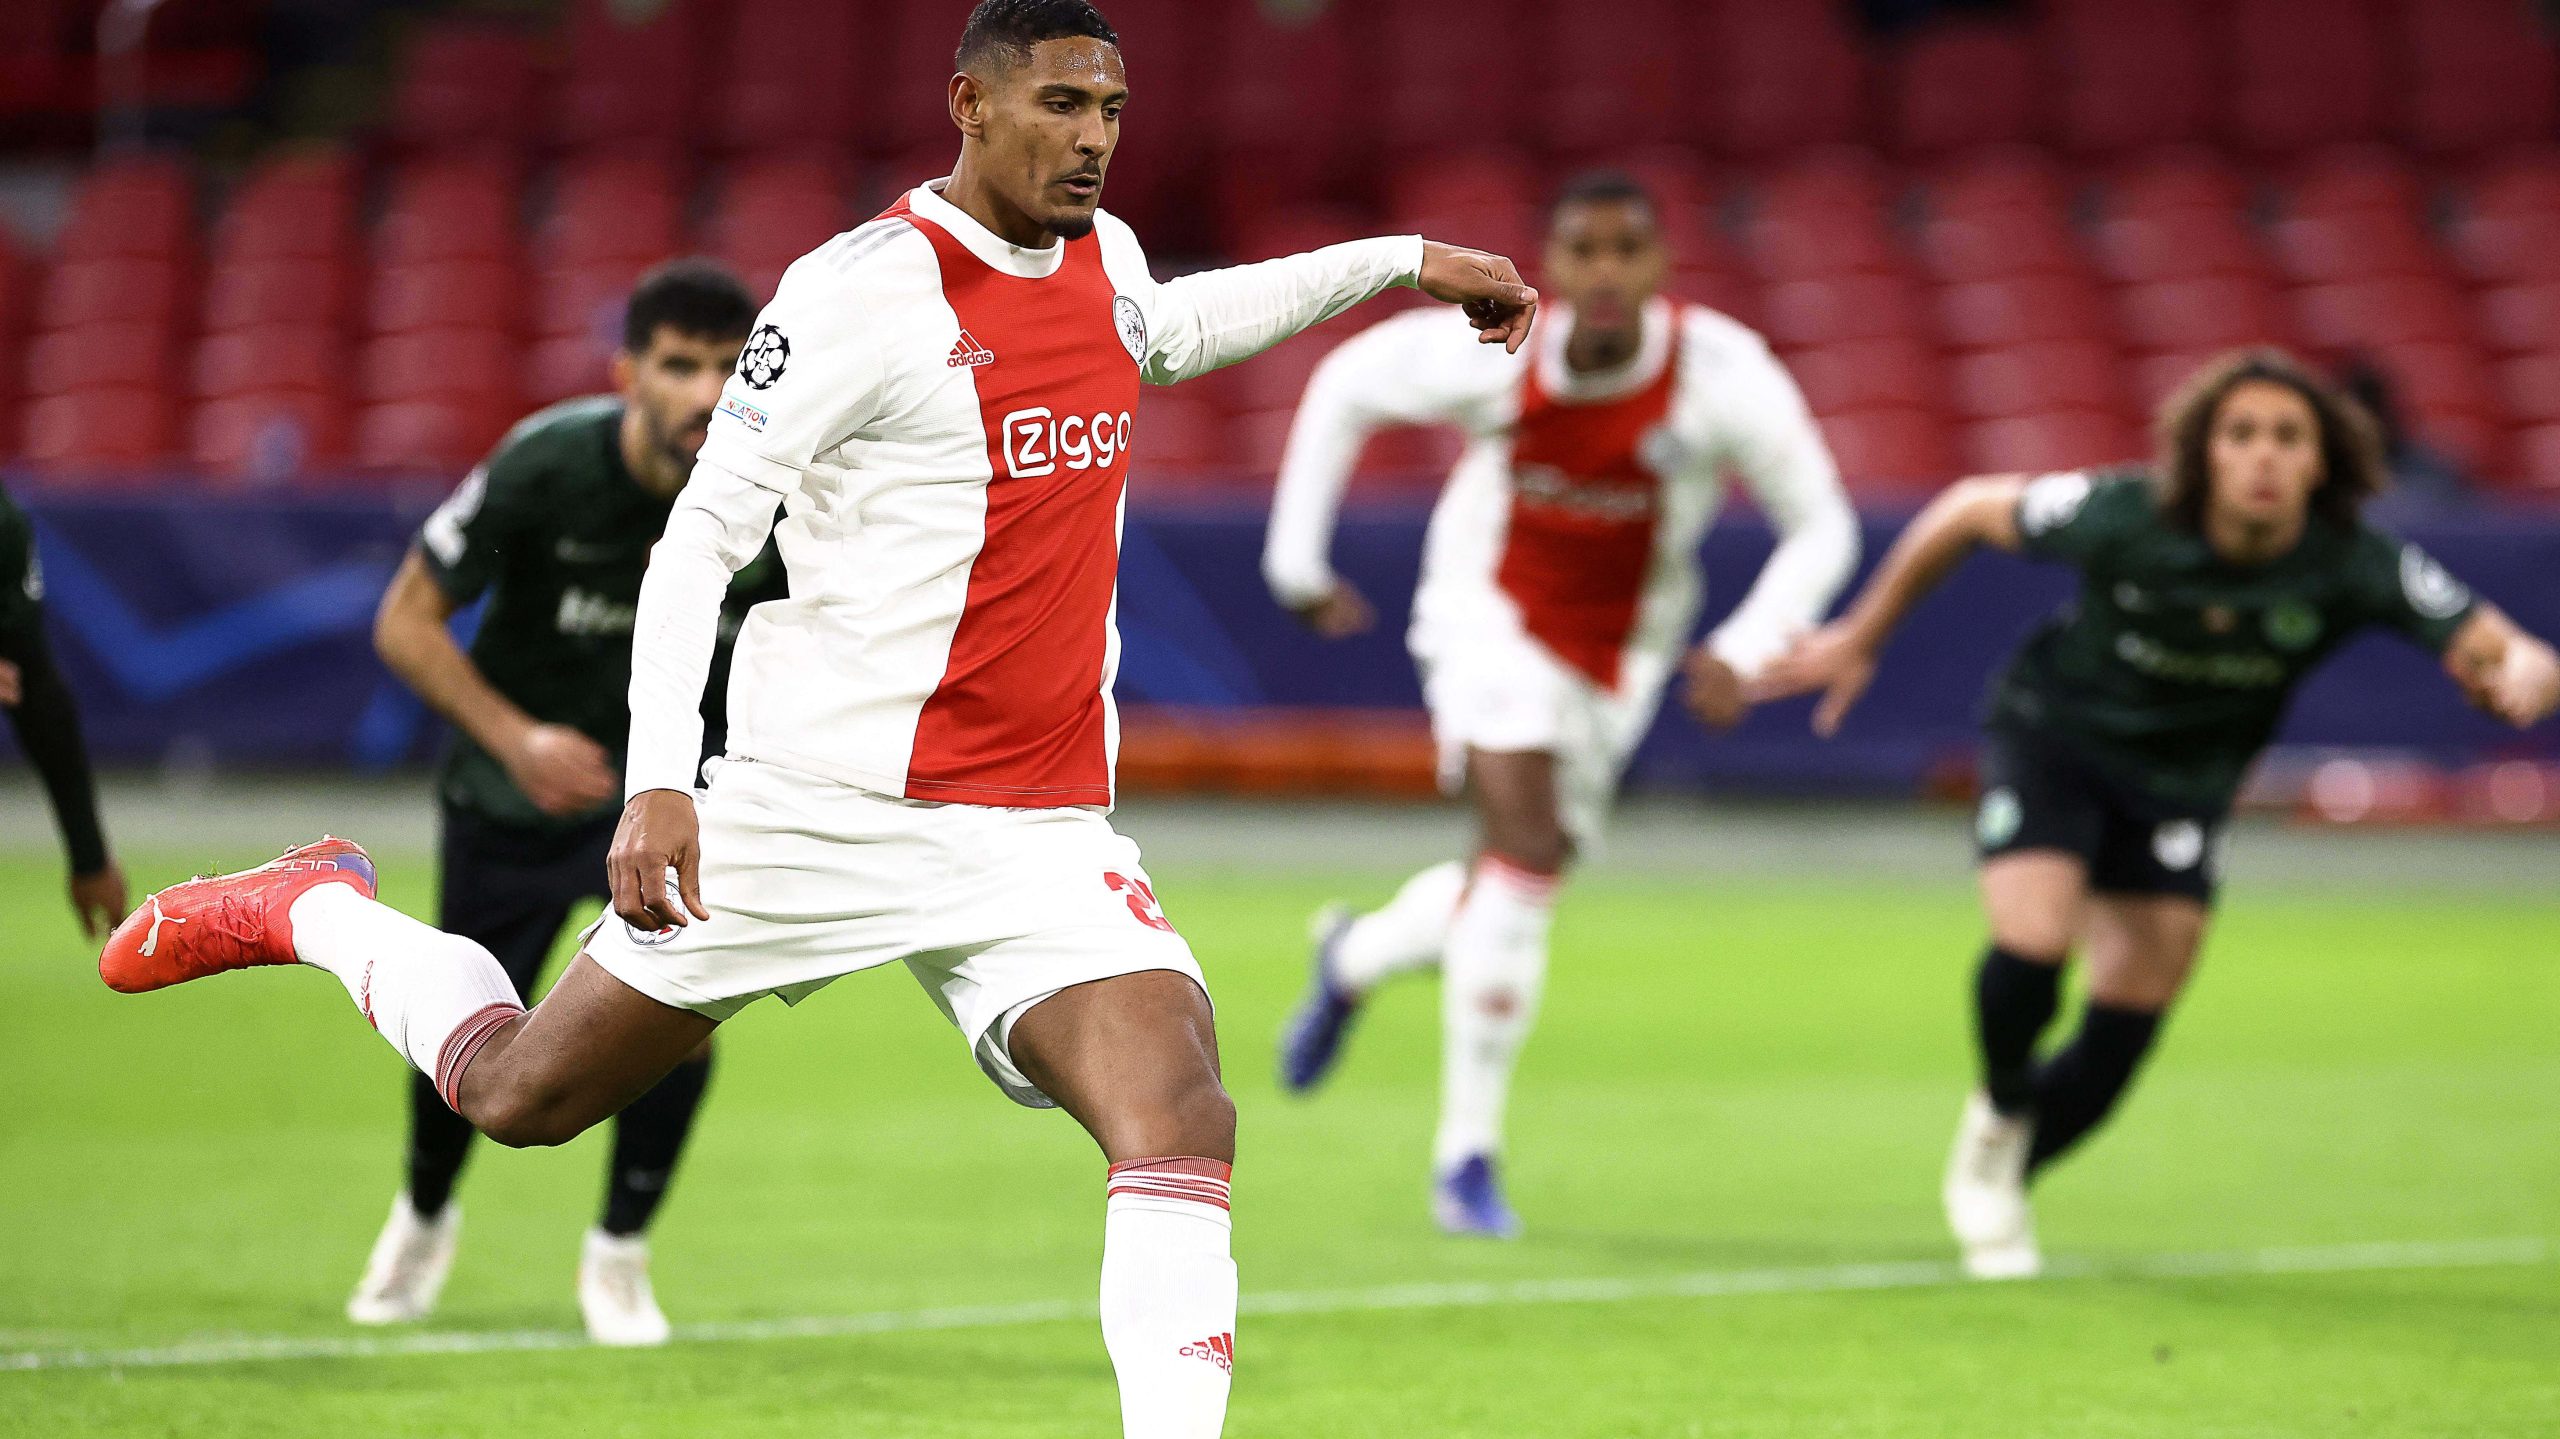 Haller equals 41-year-old Ajax record with Champions League goal against Sporting Lisbon